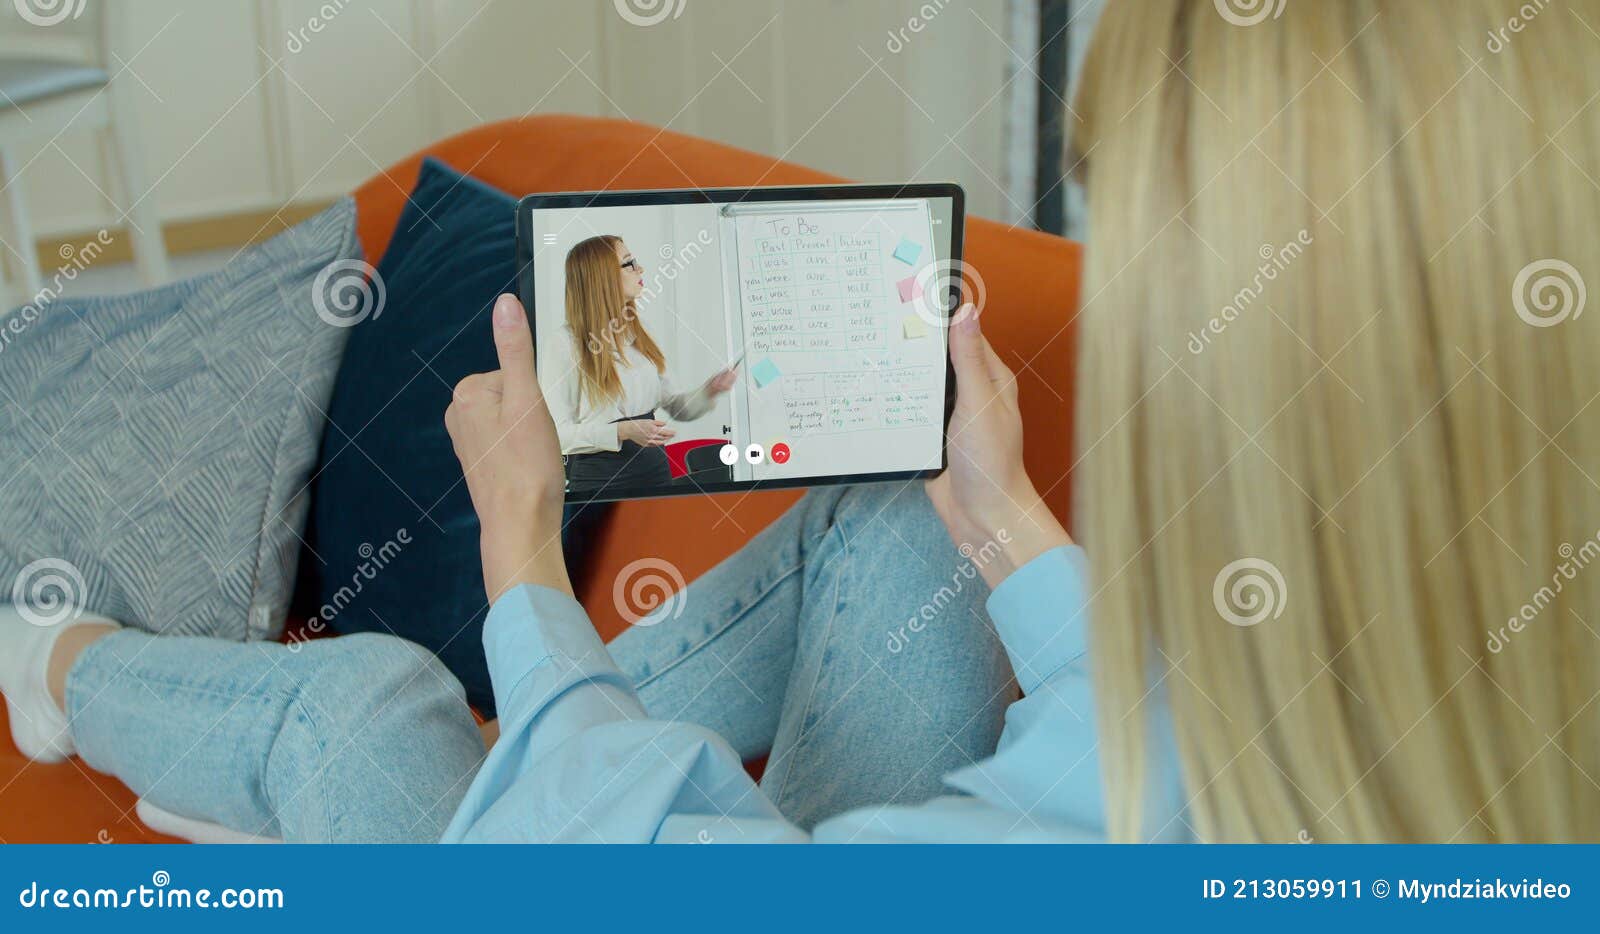 female student is studies by internet video lesson with teacher using tabletpc at home. e-learning classe or webinar at